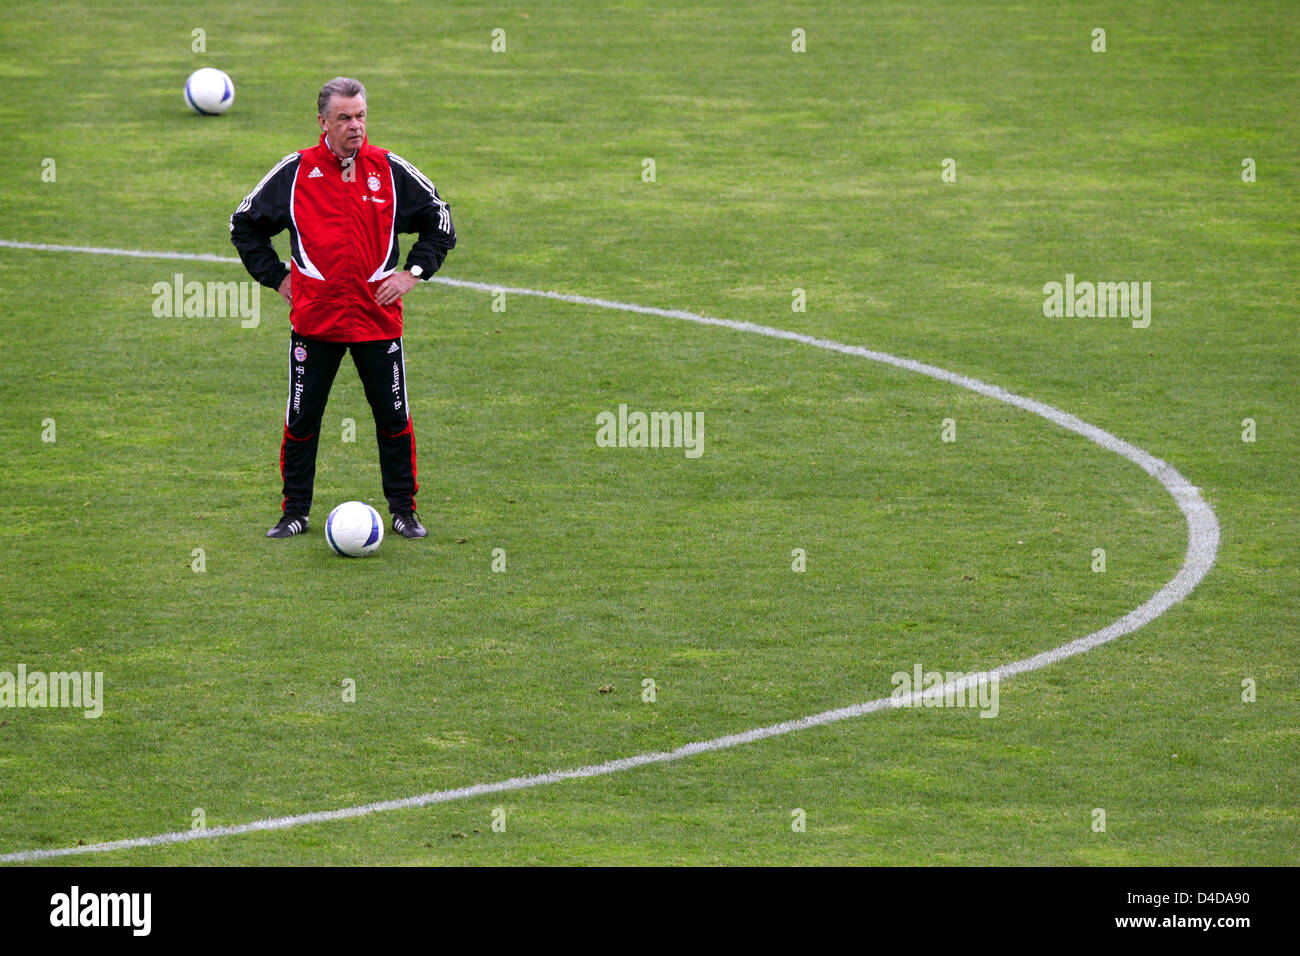 Head coach of FC Bayern Munich, Ottmar Hitzfeld is pictured during the final training session in Madrid, Spain, 09 April 2008. Bayern Munich will face Getafe FC in the UEFA Cup quarter-finals' 2nd leg match at Coliseum Alfonso Pérez in Madrid on 10 April. Photo: MATTHIAS SCHRADER Stock Photo